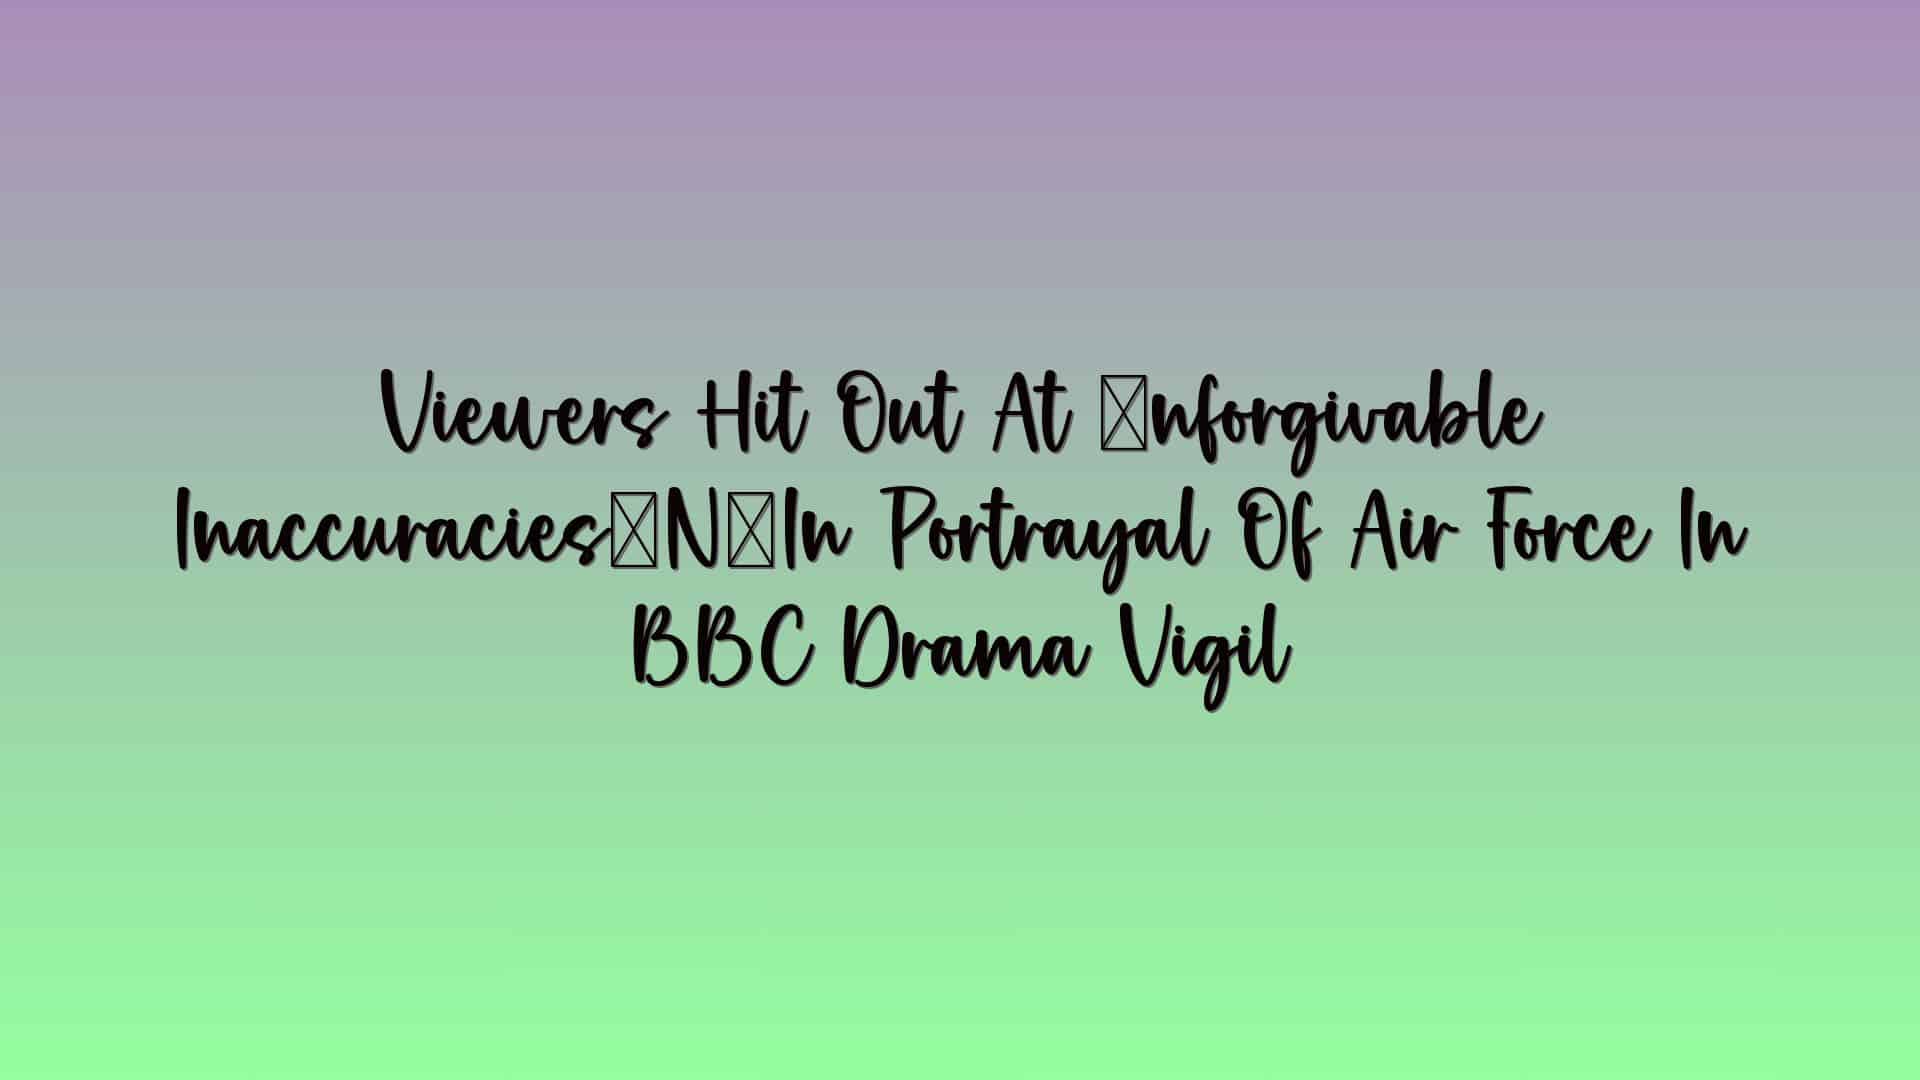 Viewers Hit Out At ‘unforgivable Inaccuracies’ In Portrayal Of Air Force In BBC Drama Vigil